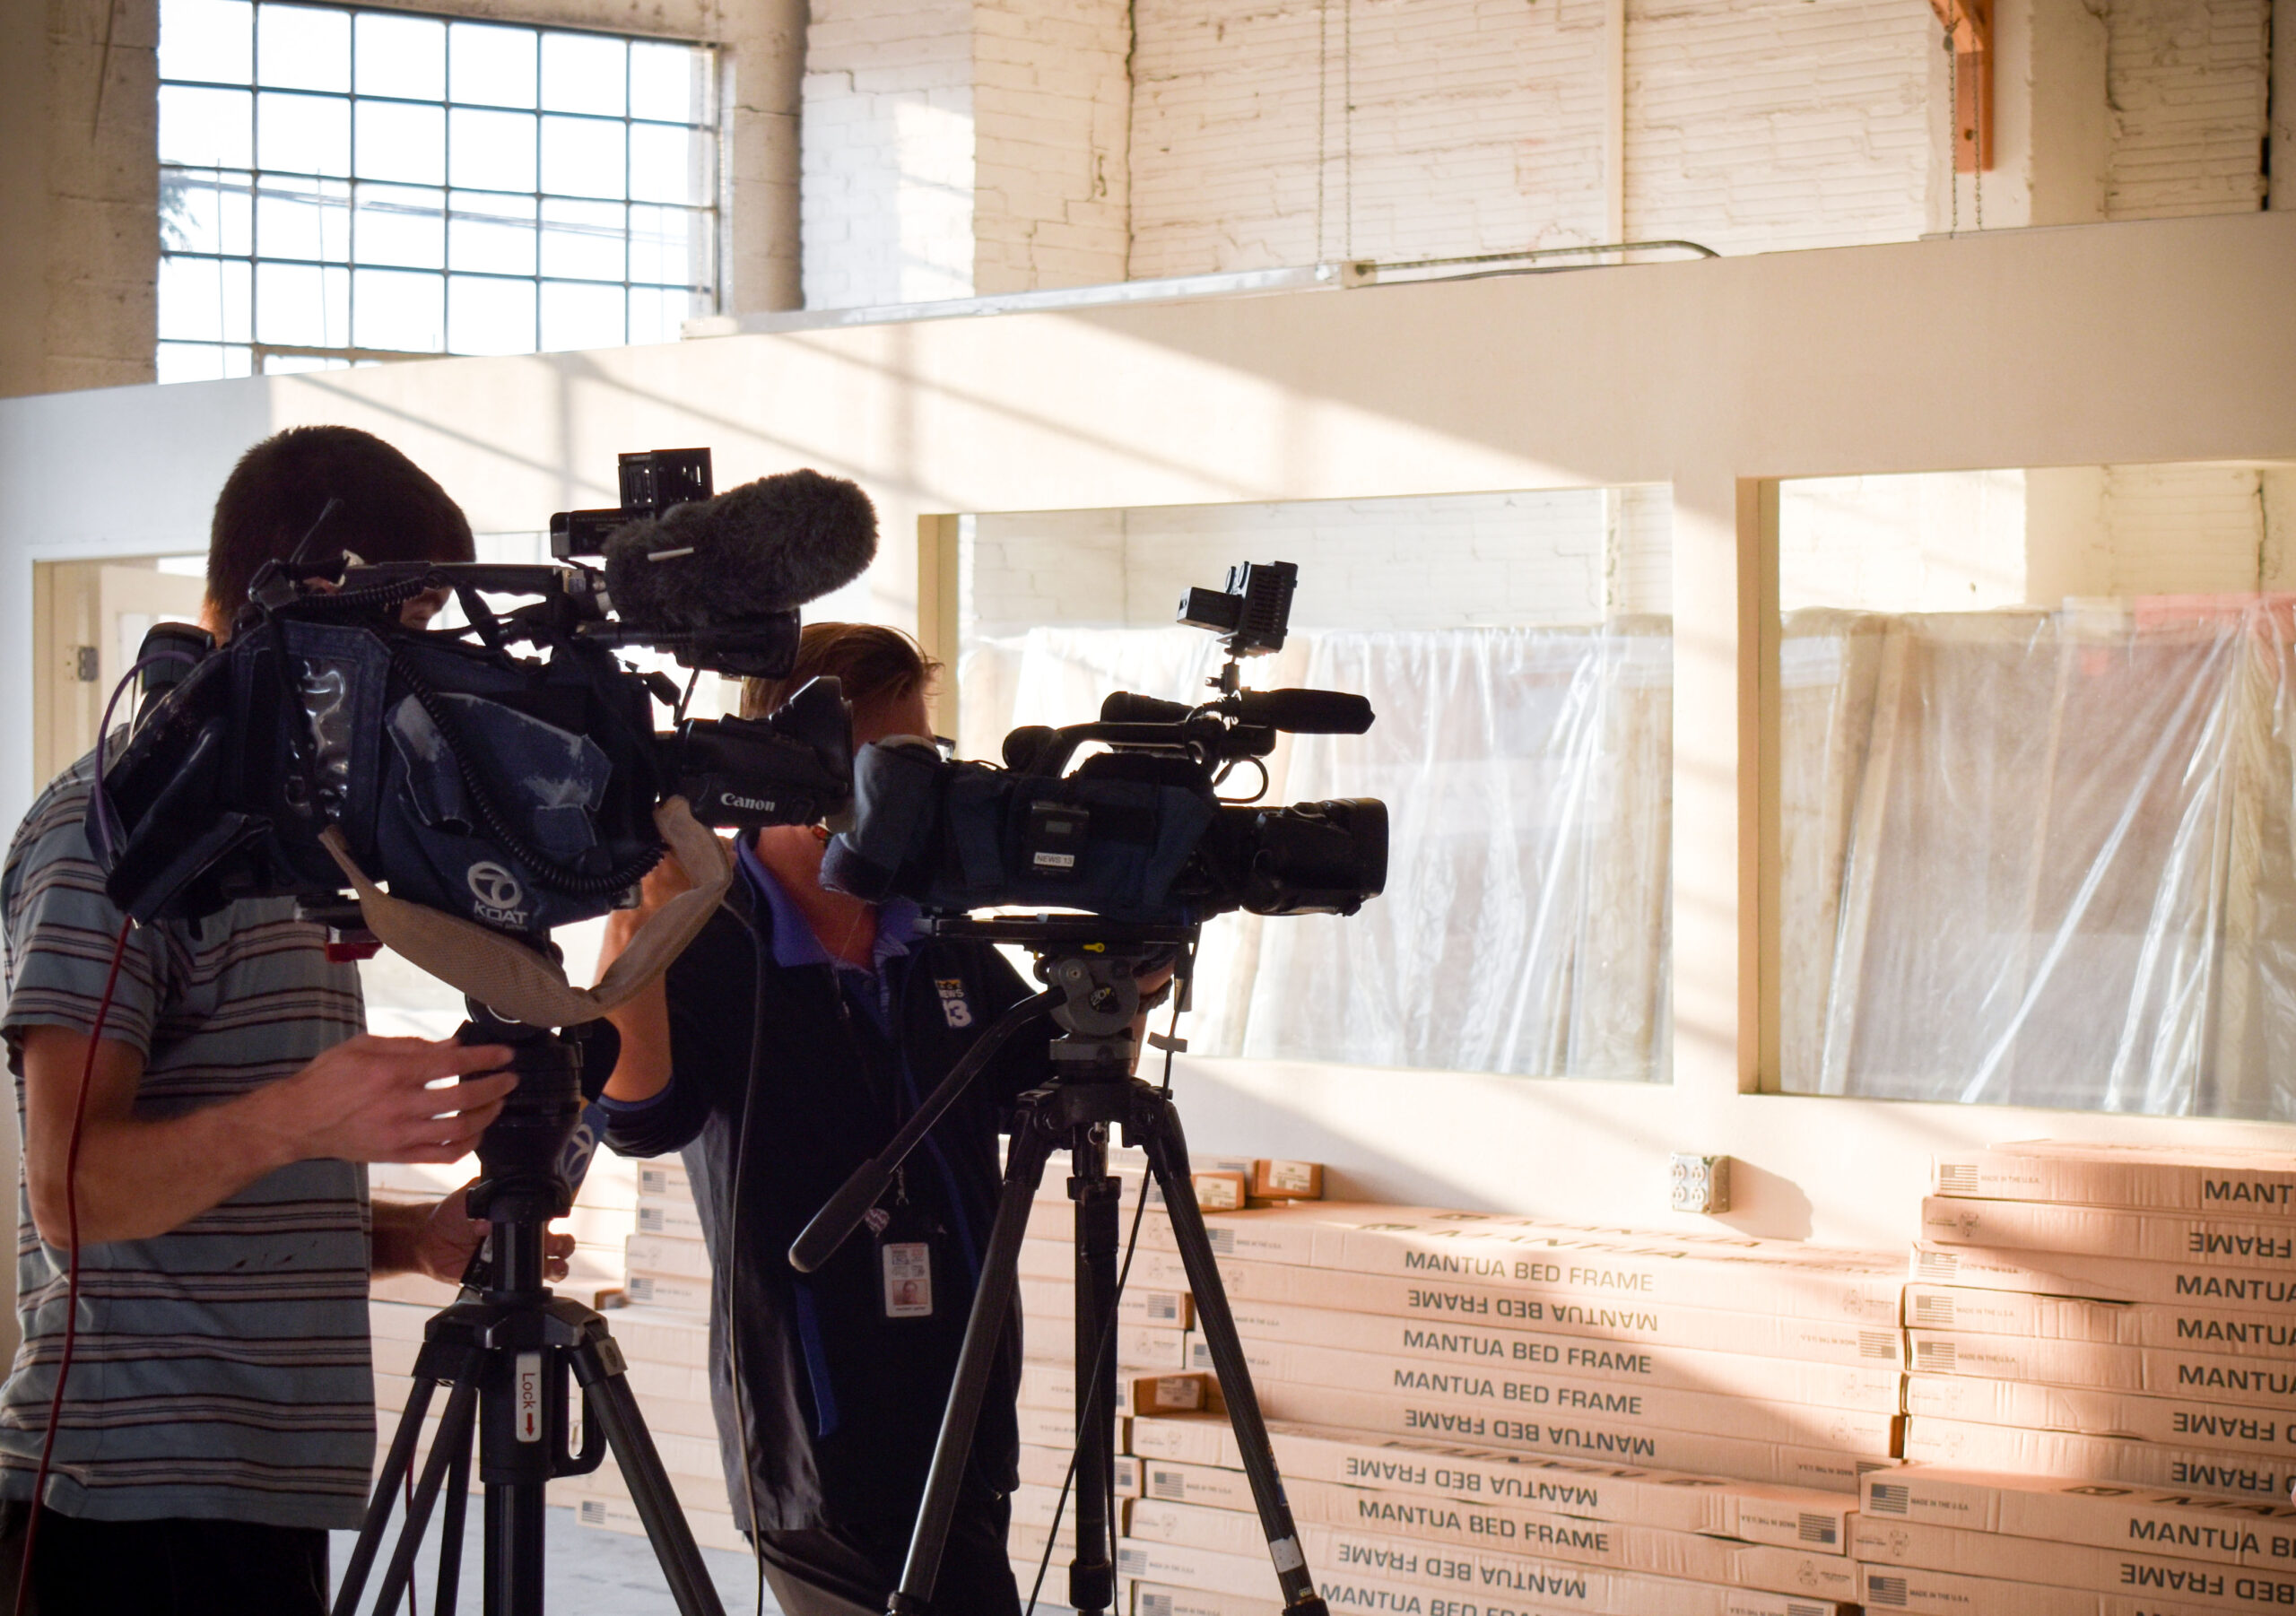 A news crew with professional cameras are silhouetted inside a sun filled warehouse.